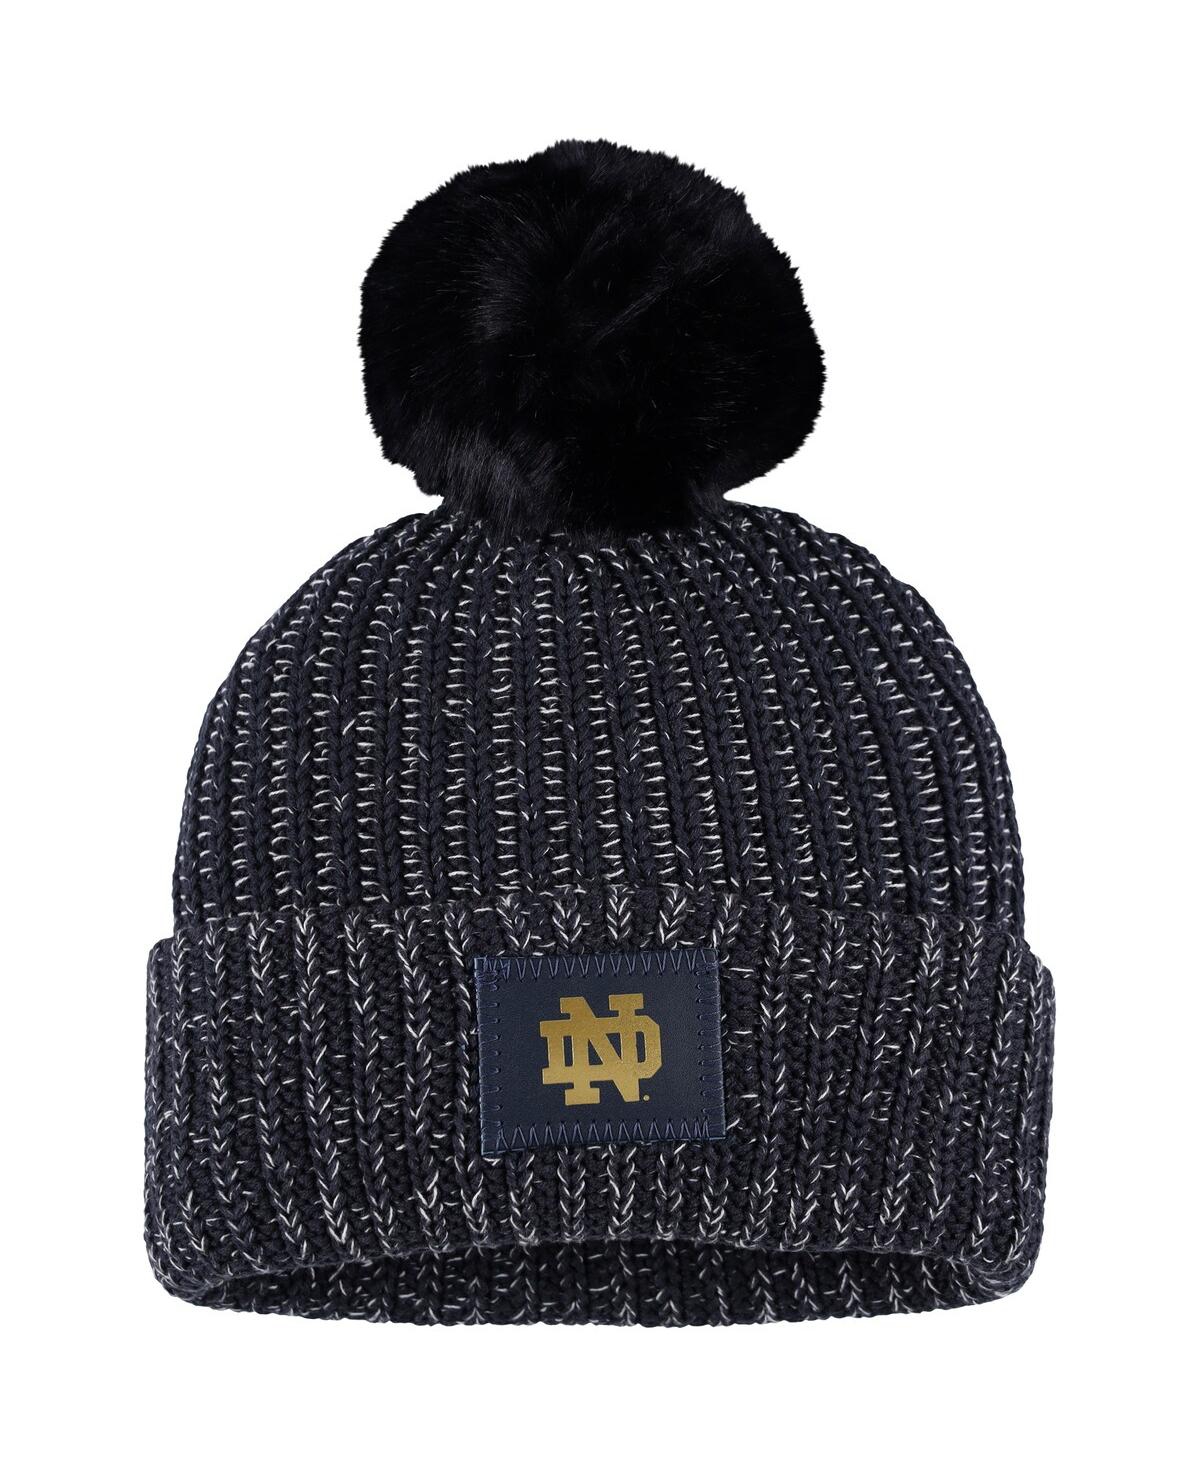 Women's Love Your Melon Navy Notre Dame Fighting Irish Cuffed Knit Hat with Pom - Navy